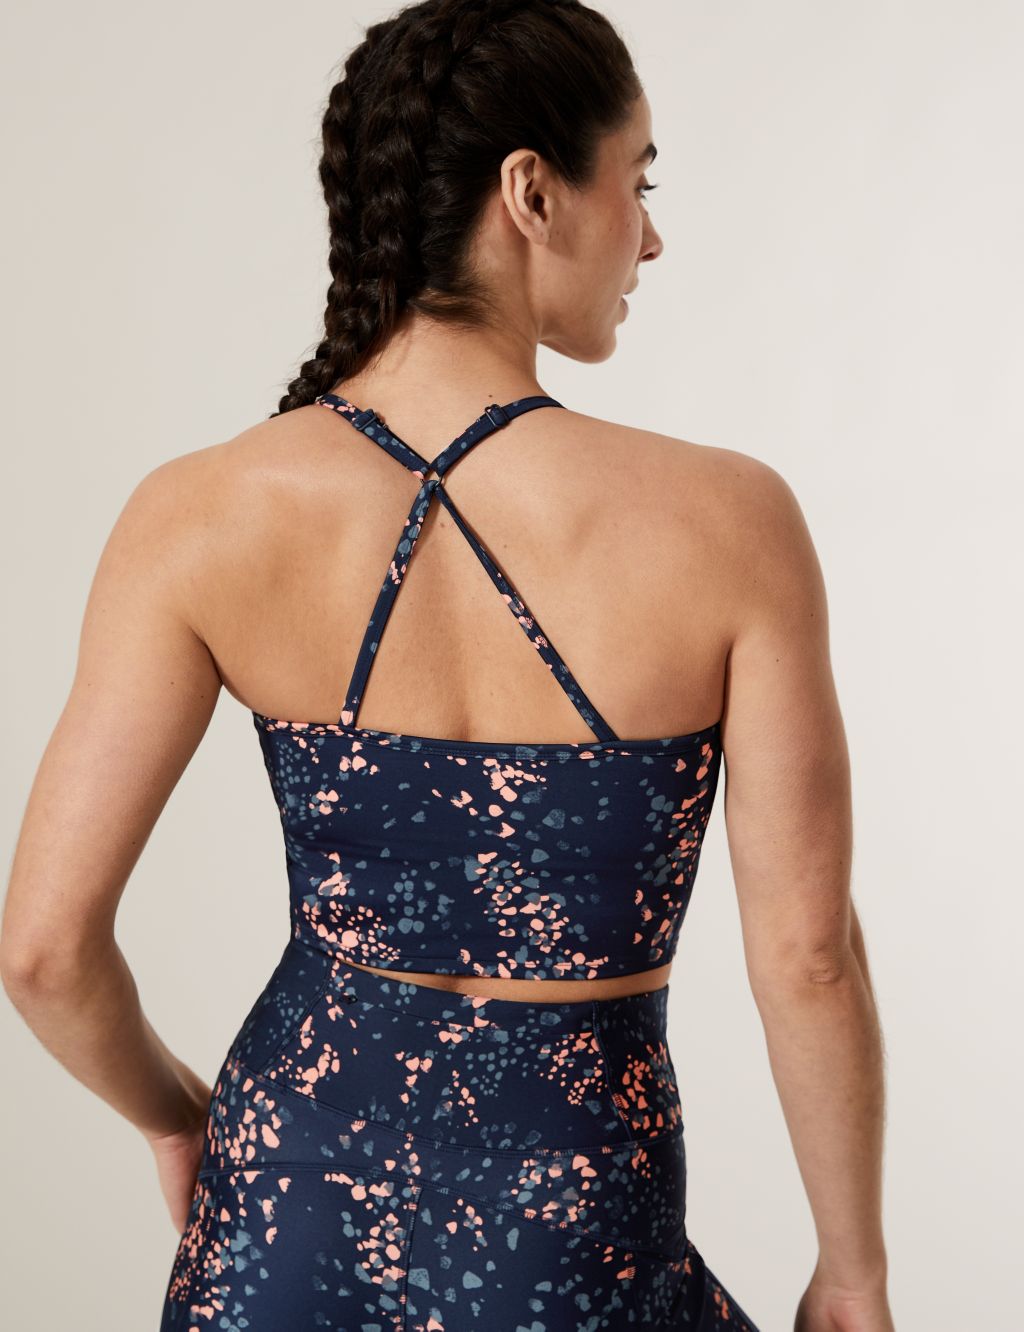 Printed Strappy Cross Back Crop Top image 1